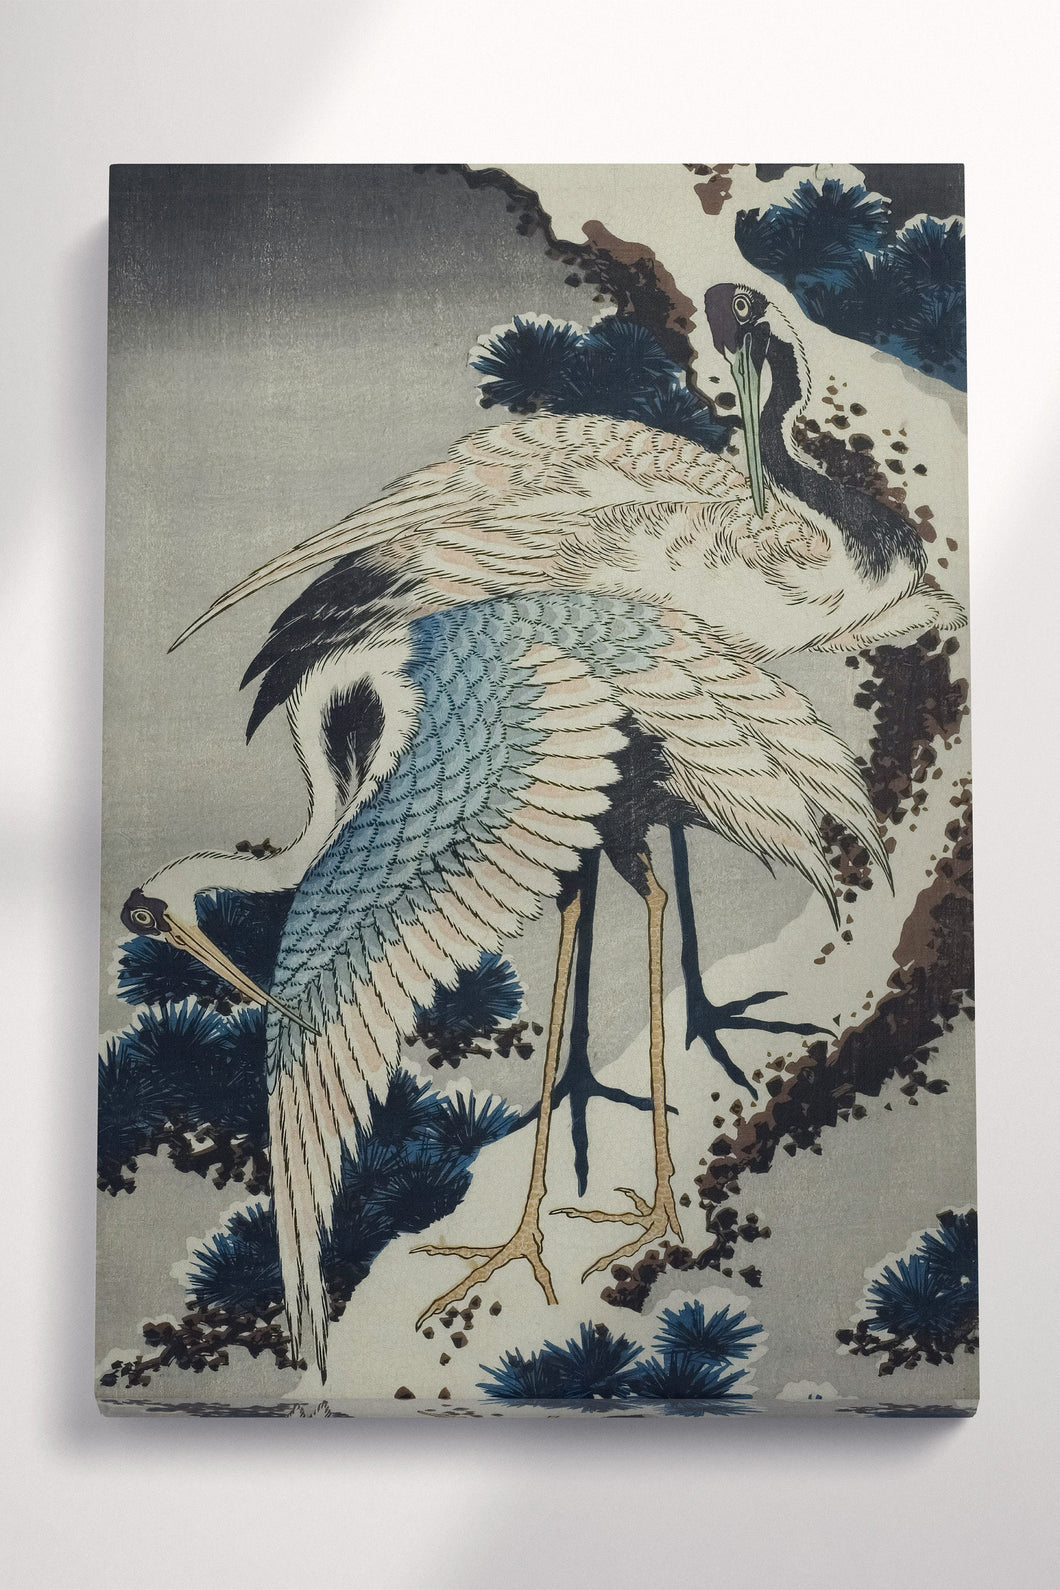 Cranes on Branch of Snow-covered Pine Katsushika Hokusai Japanese Art 1820 Canvas Wall Art Eco Leather Print, Made in Italy!